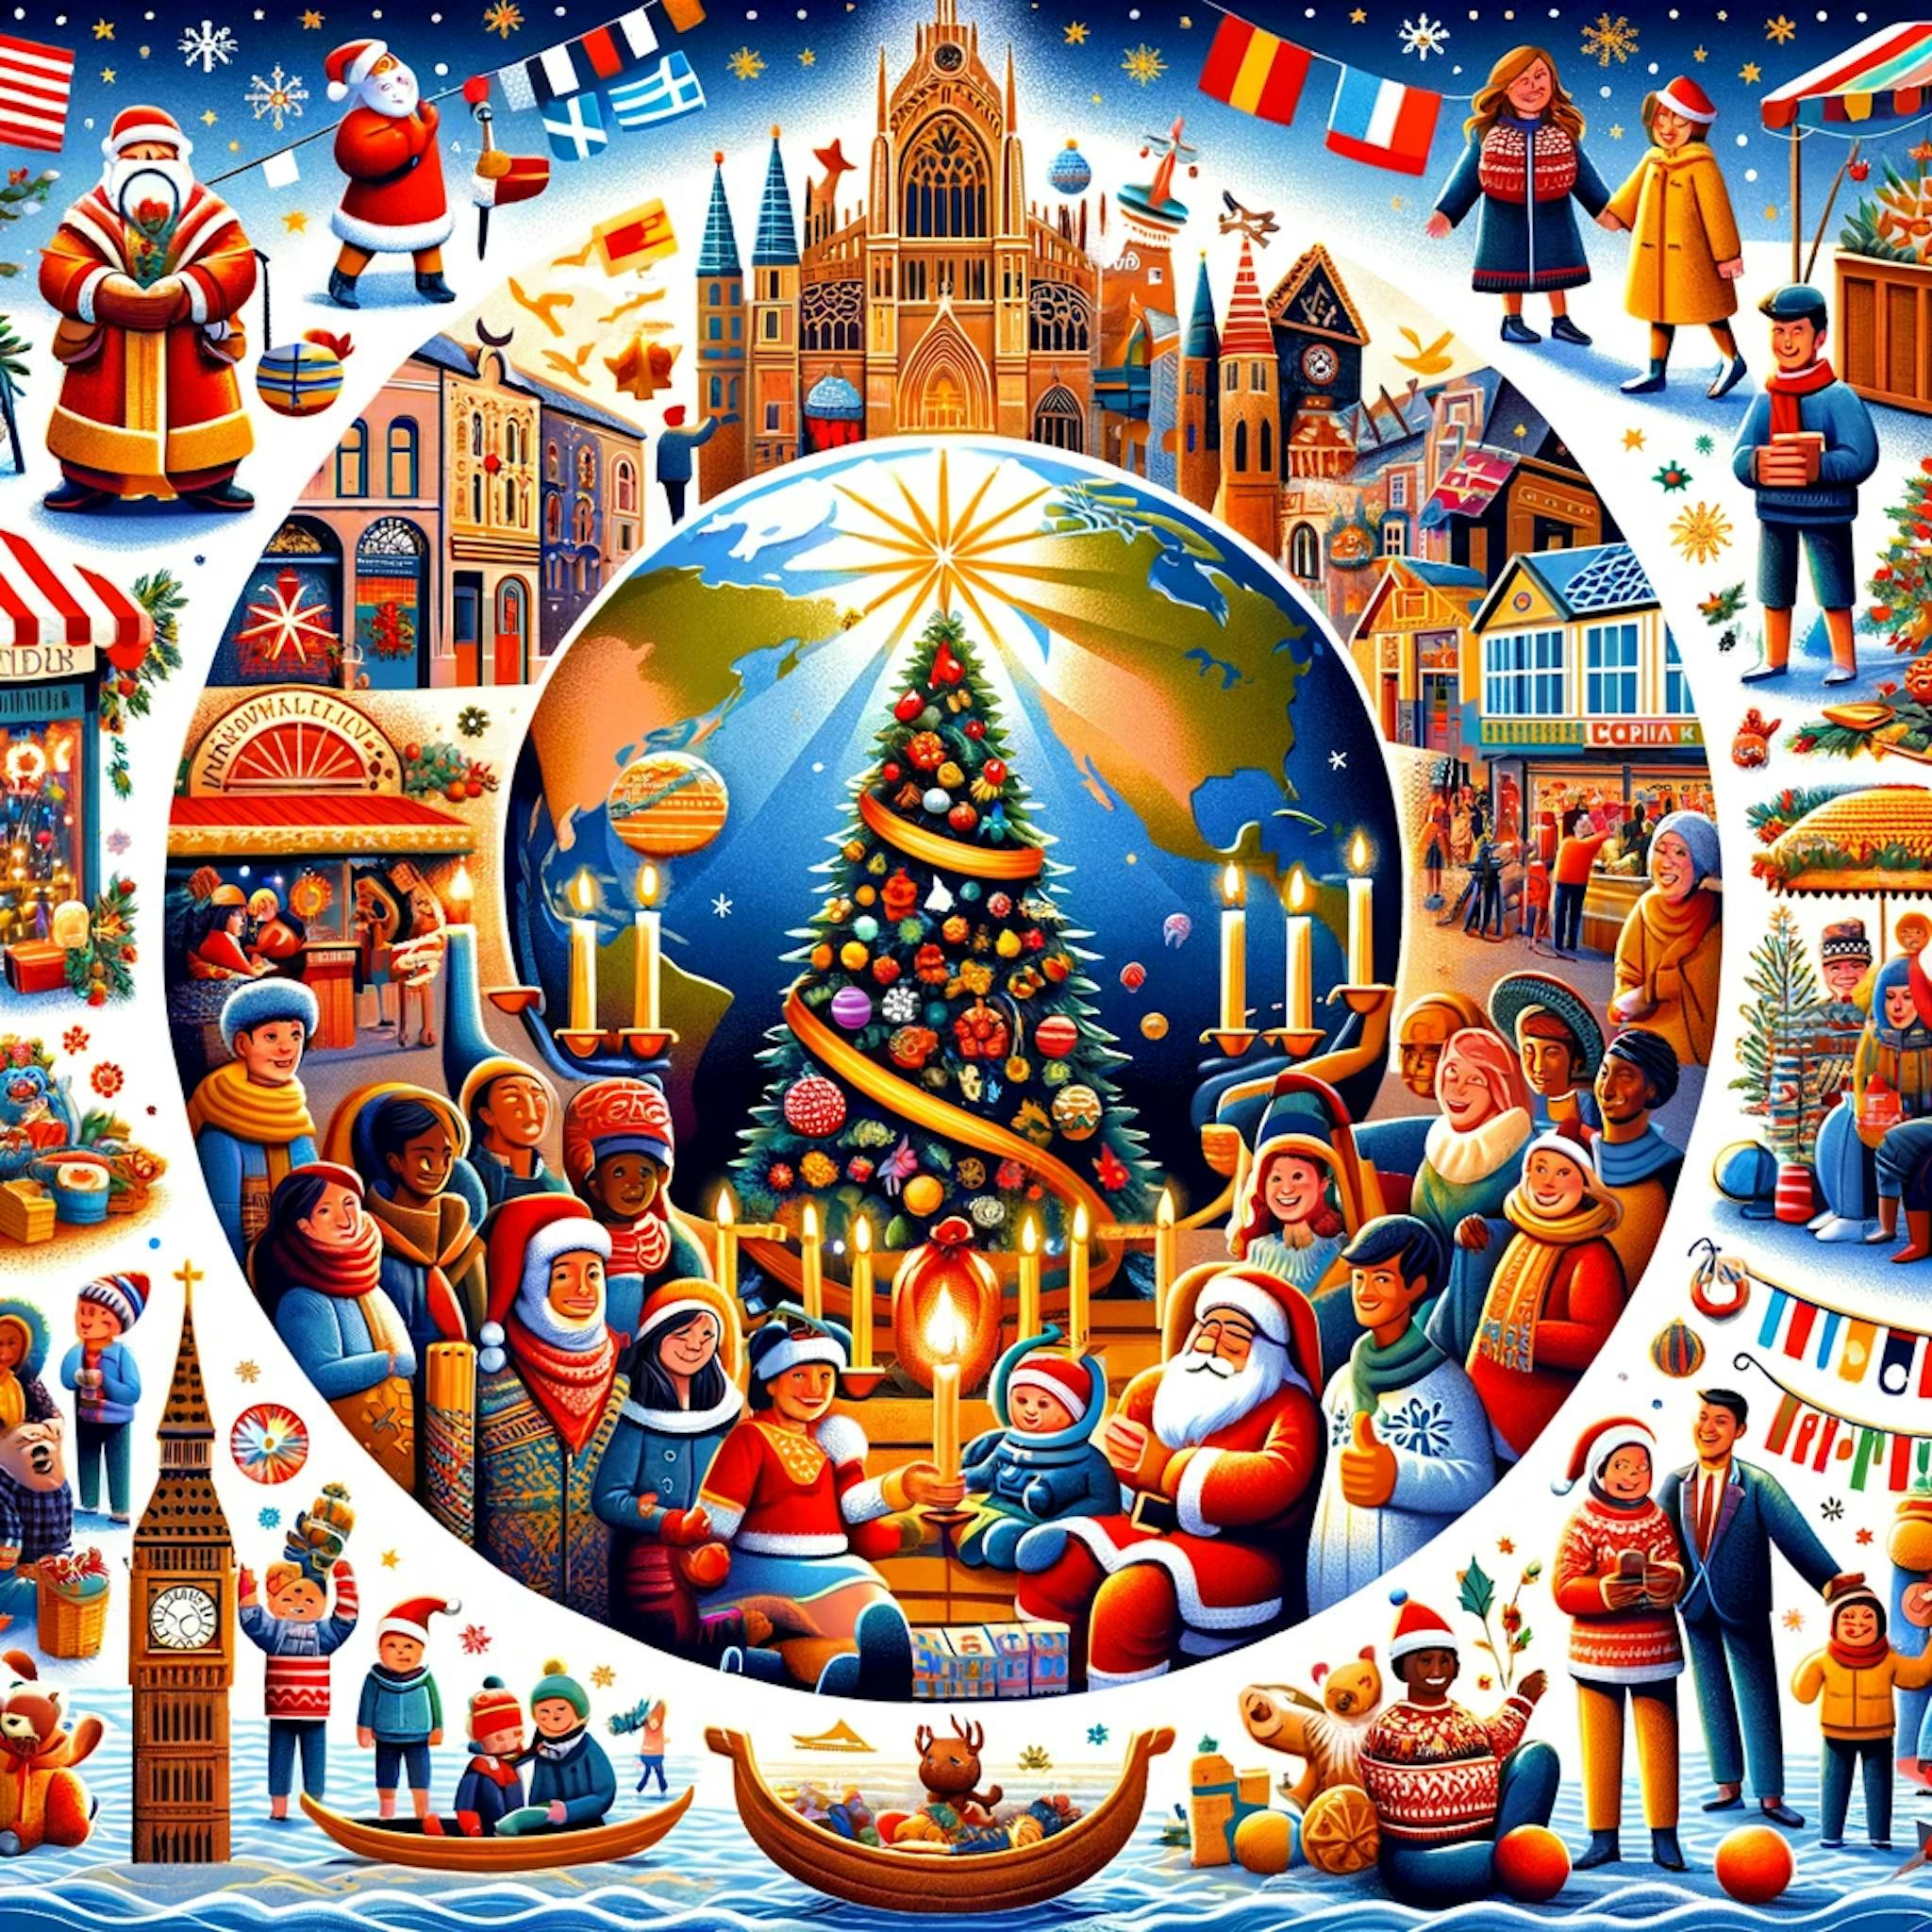 how people from around the world celebrate Christmas, showcasing a variety of traditions and customs from different countries.